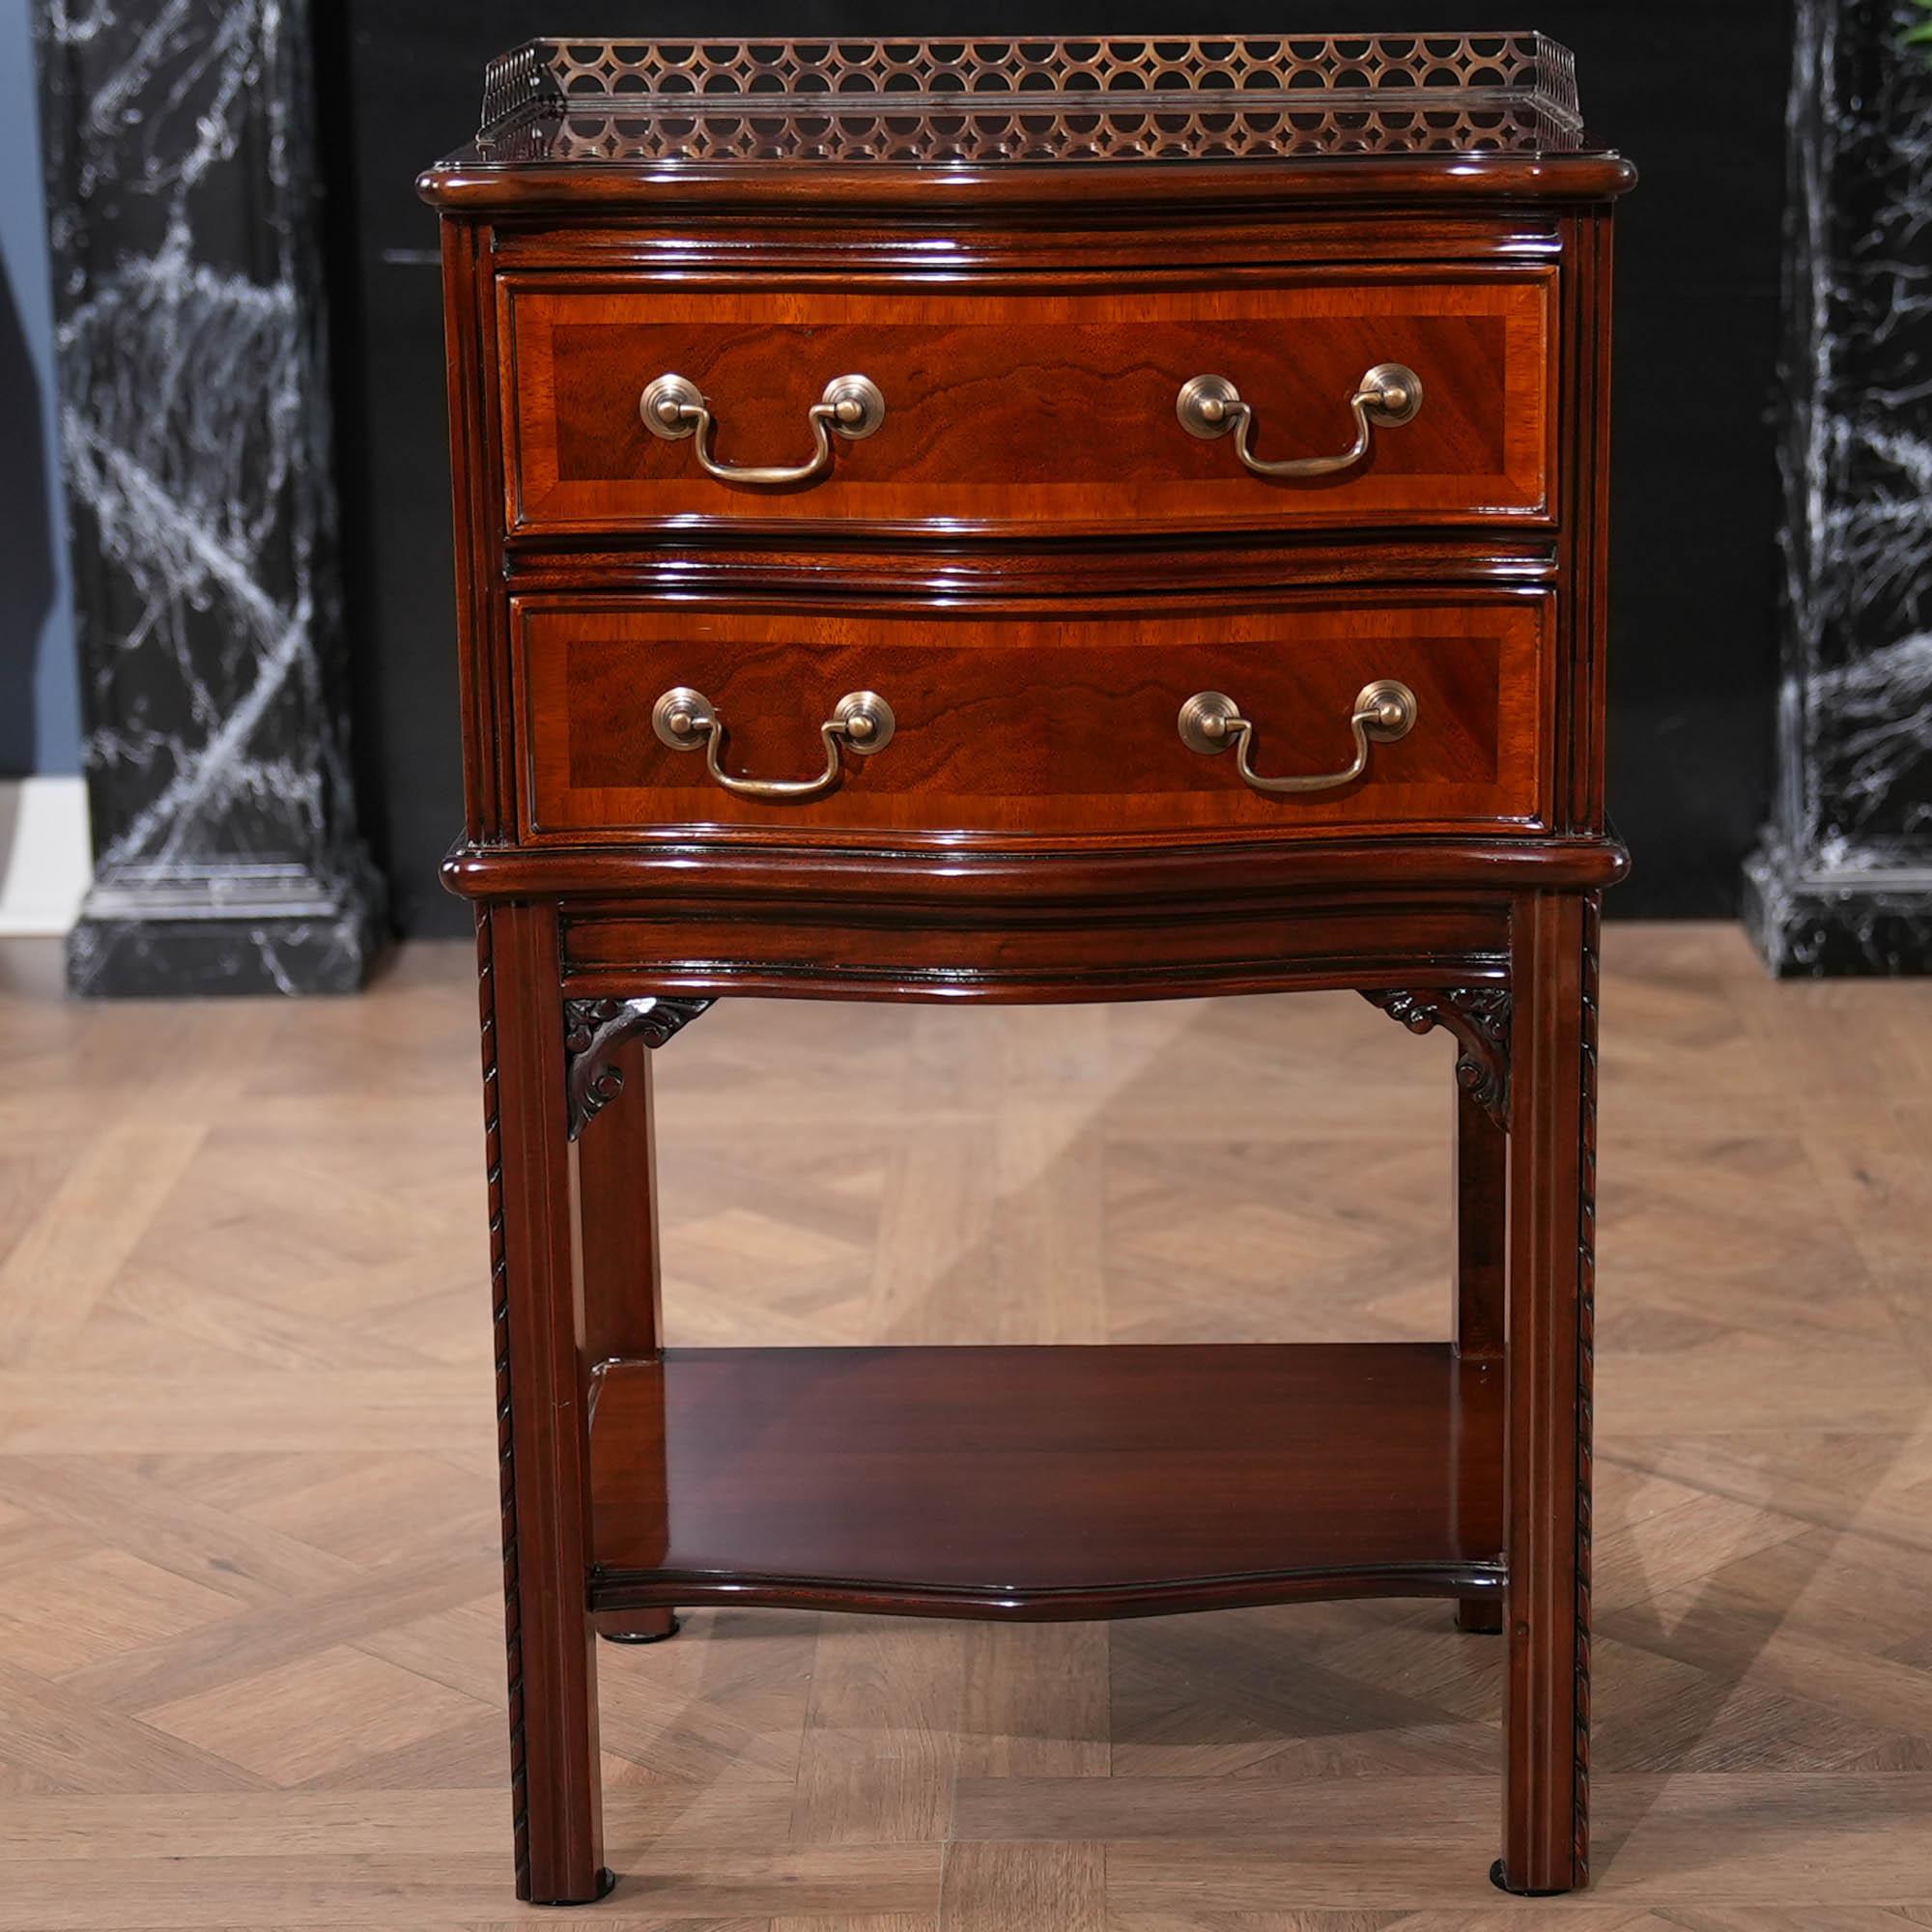 An attractive two drawer serpentine front Chippendale End Table suitable for use as either an end table or as a night stand. Great hand carved details and designer quality hardware give the Niagara Furniture Chippendale End Table a great look in any